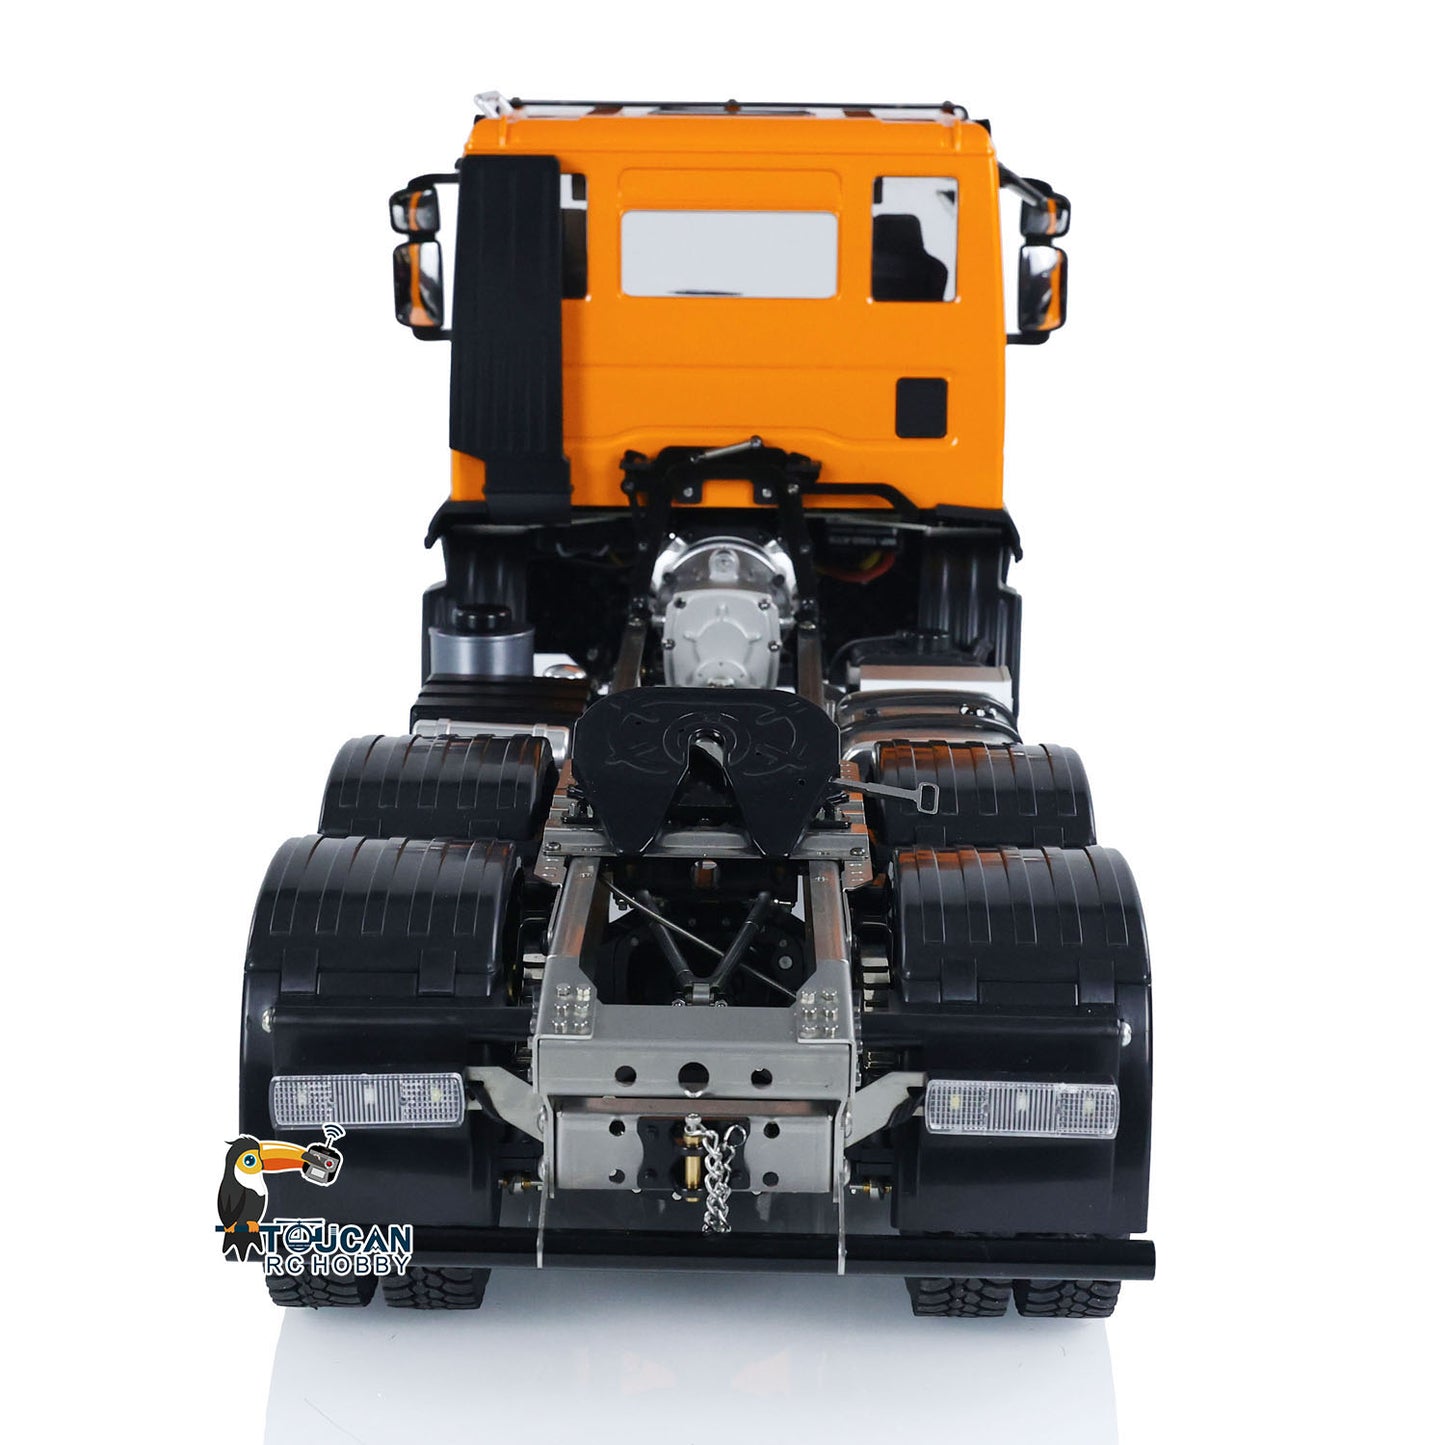 1/14 6x6 RC Tractor Radio Controlled Truck 2-speed Transmission Car Sounds Lights Metal Chassis Servo ESC Motor DIY